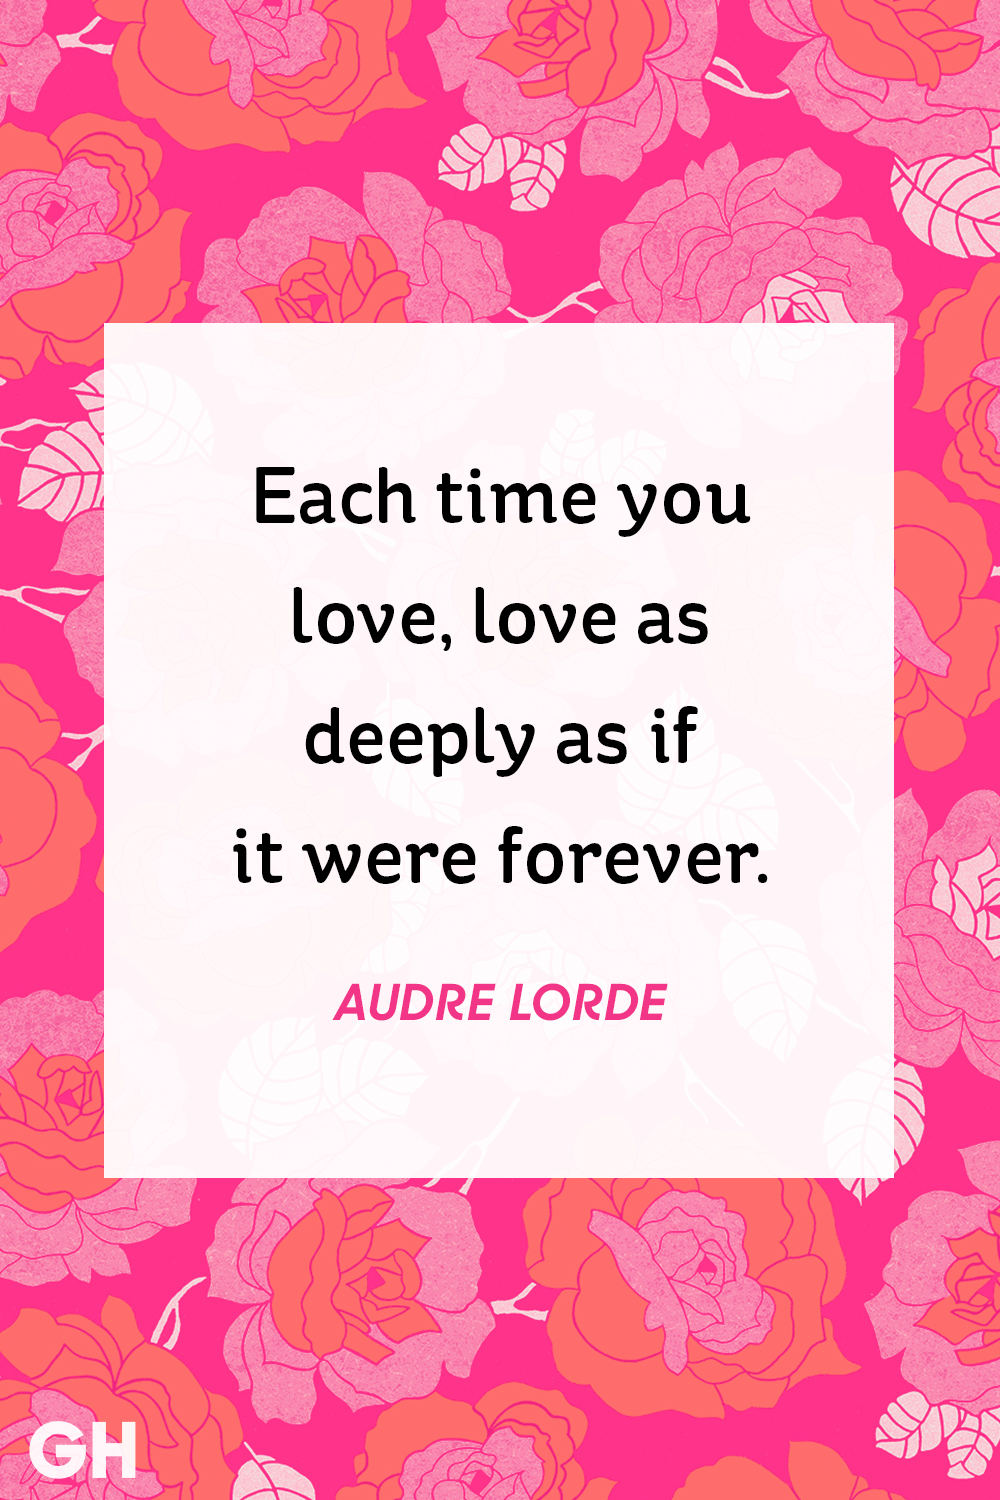 each time you love, love as deeply as if it were forever. Audre lorde